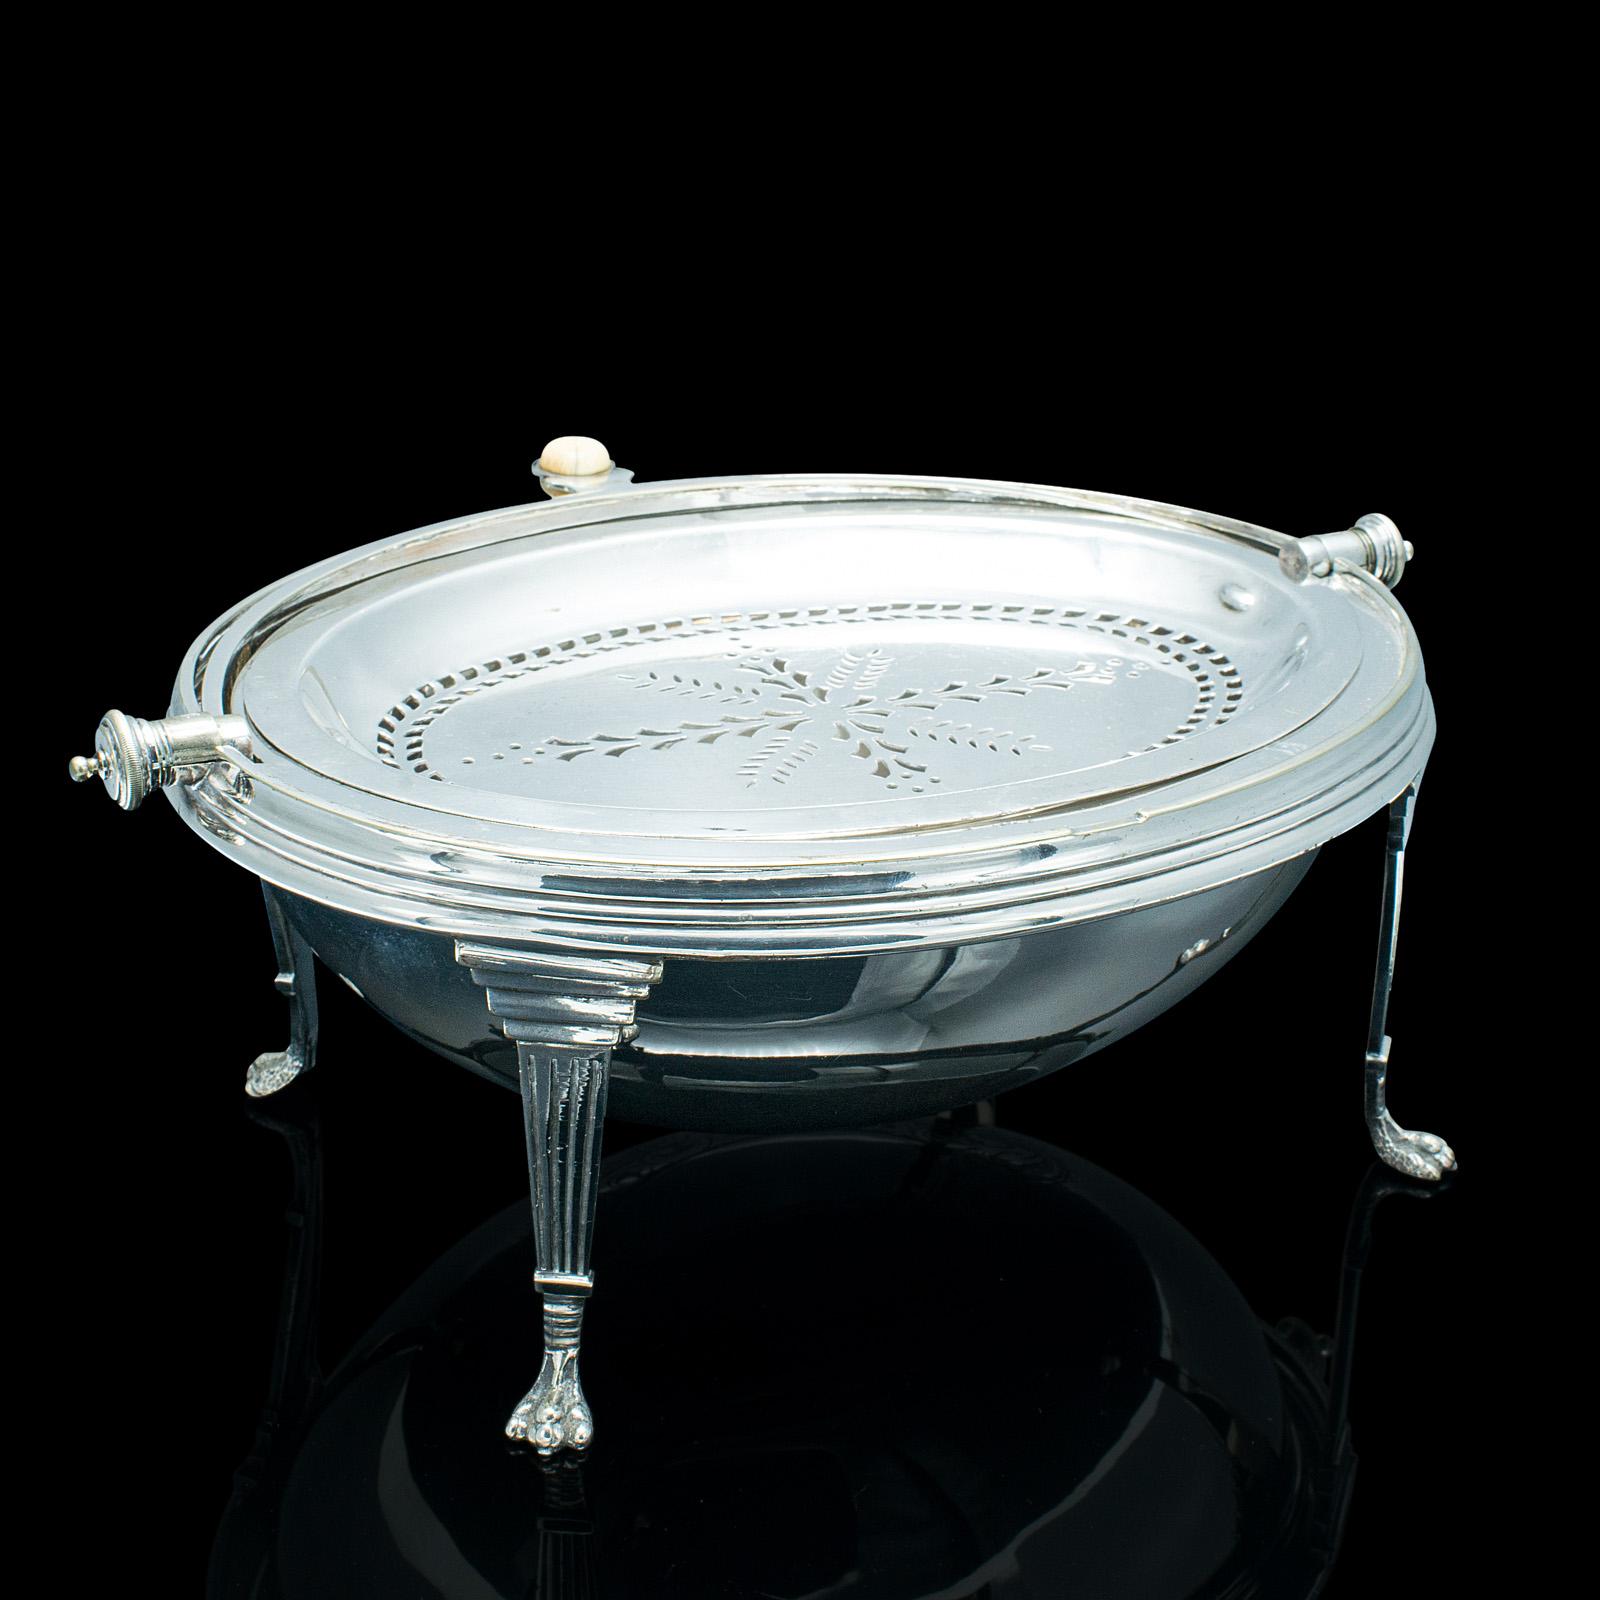 This is an antique roll-over serving dish. An English, silver plated dome top tureen or server, dating to the early 20th century, circa 1920.

Add an elegant touch to the table with this striking tureen
Displays a desirable aged patina and in very